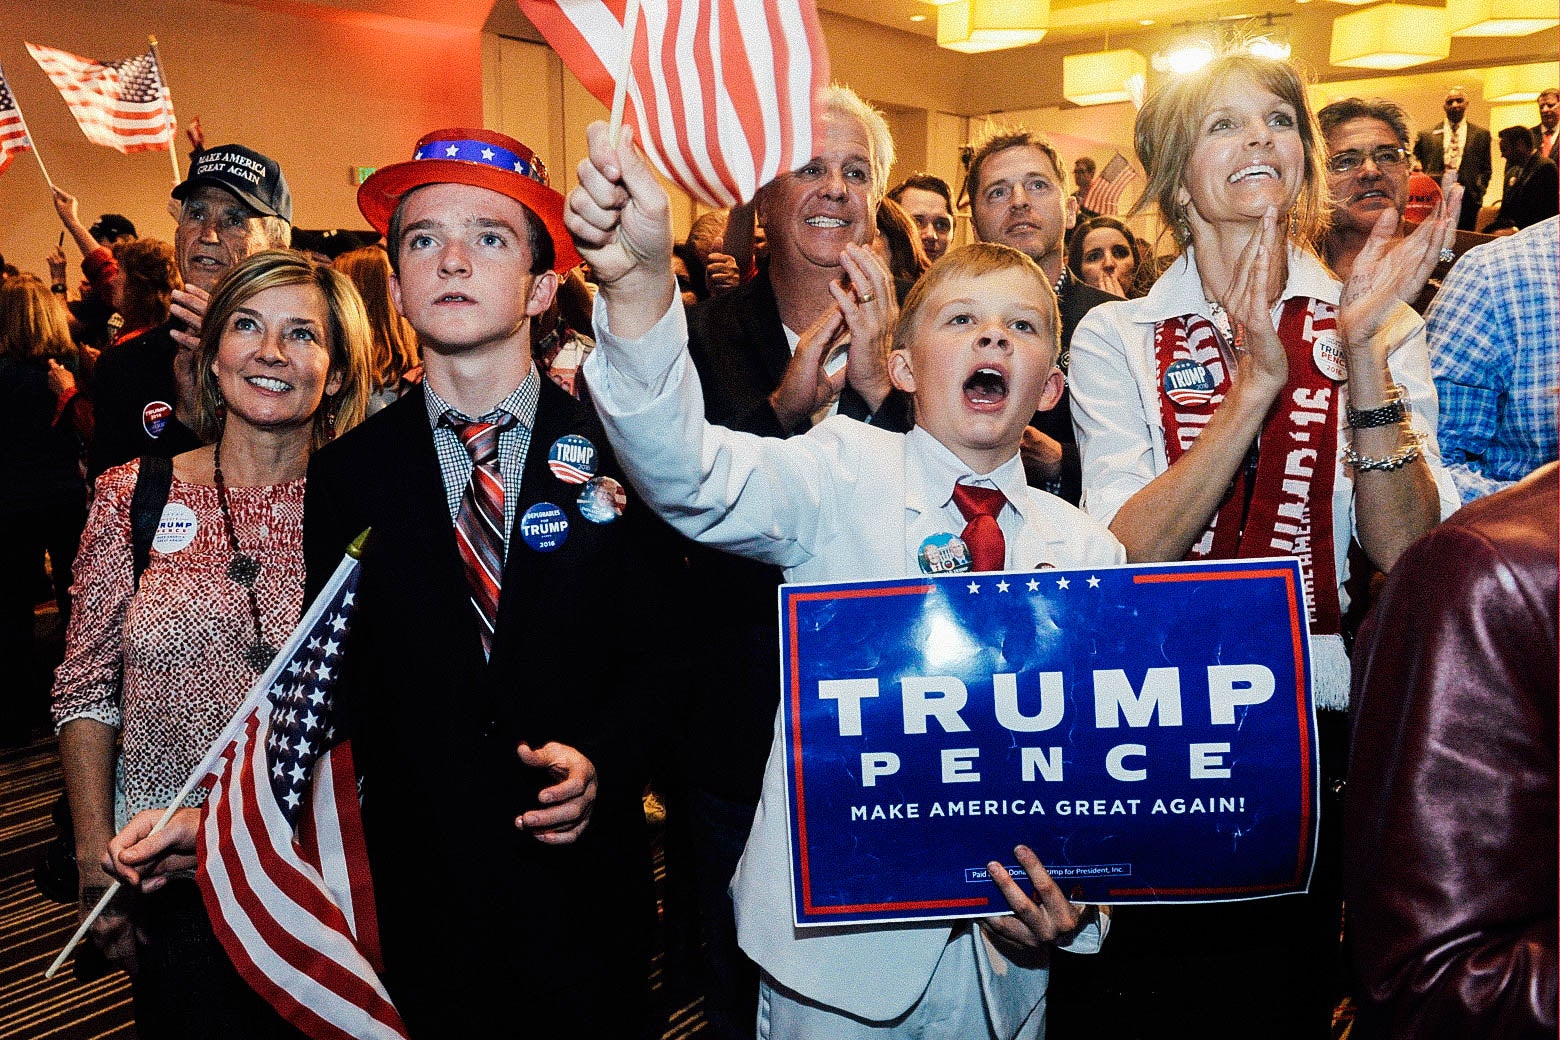 Donald Trump supporters at the Colorado GOP Election Night Party in Greenwood Village celebrate after he is declared winner of the 2016 U.S. election on Nov. 8, 2016.